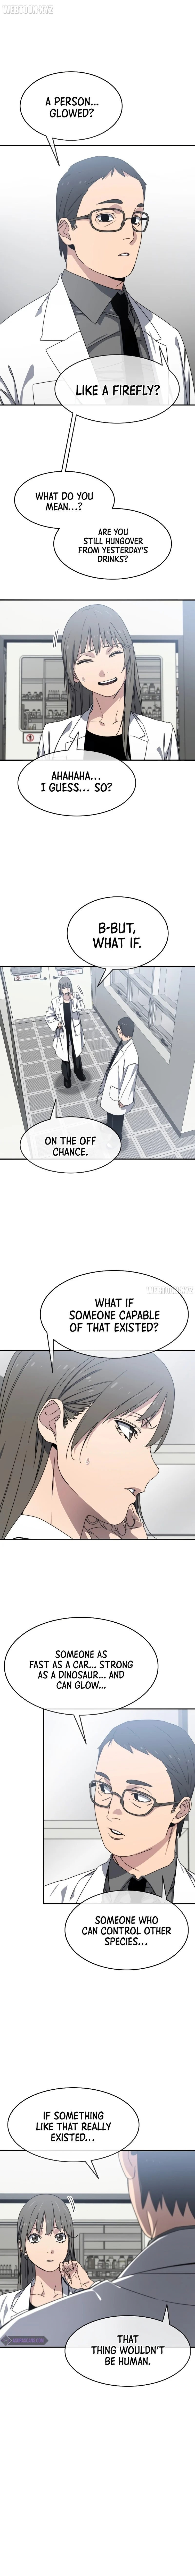 existence-chap-16-10